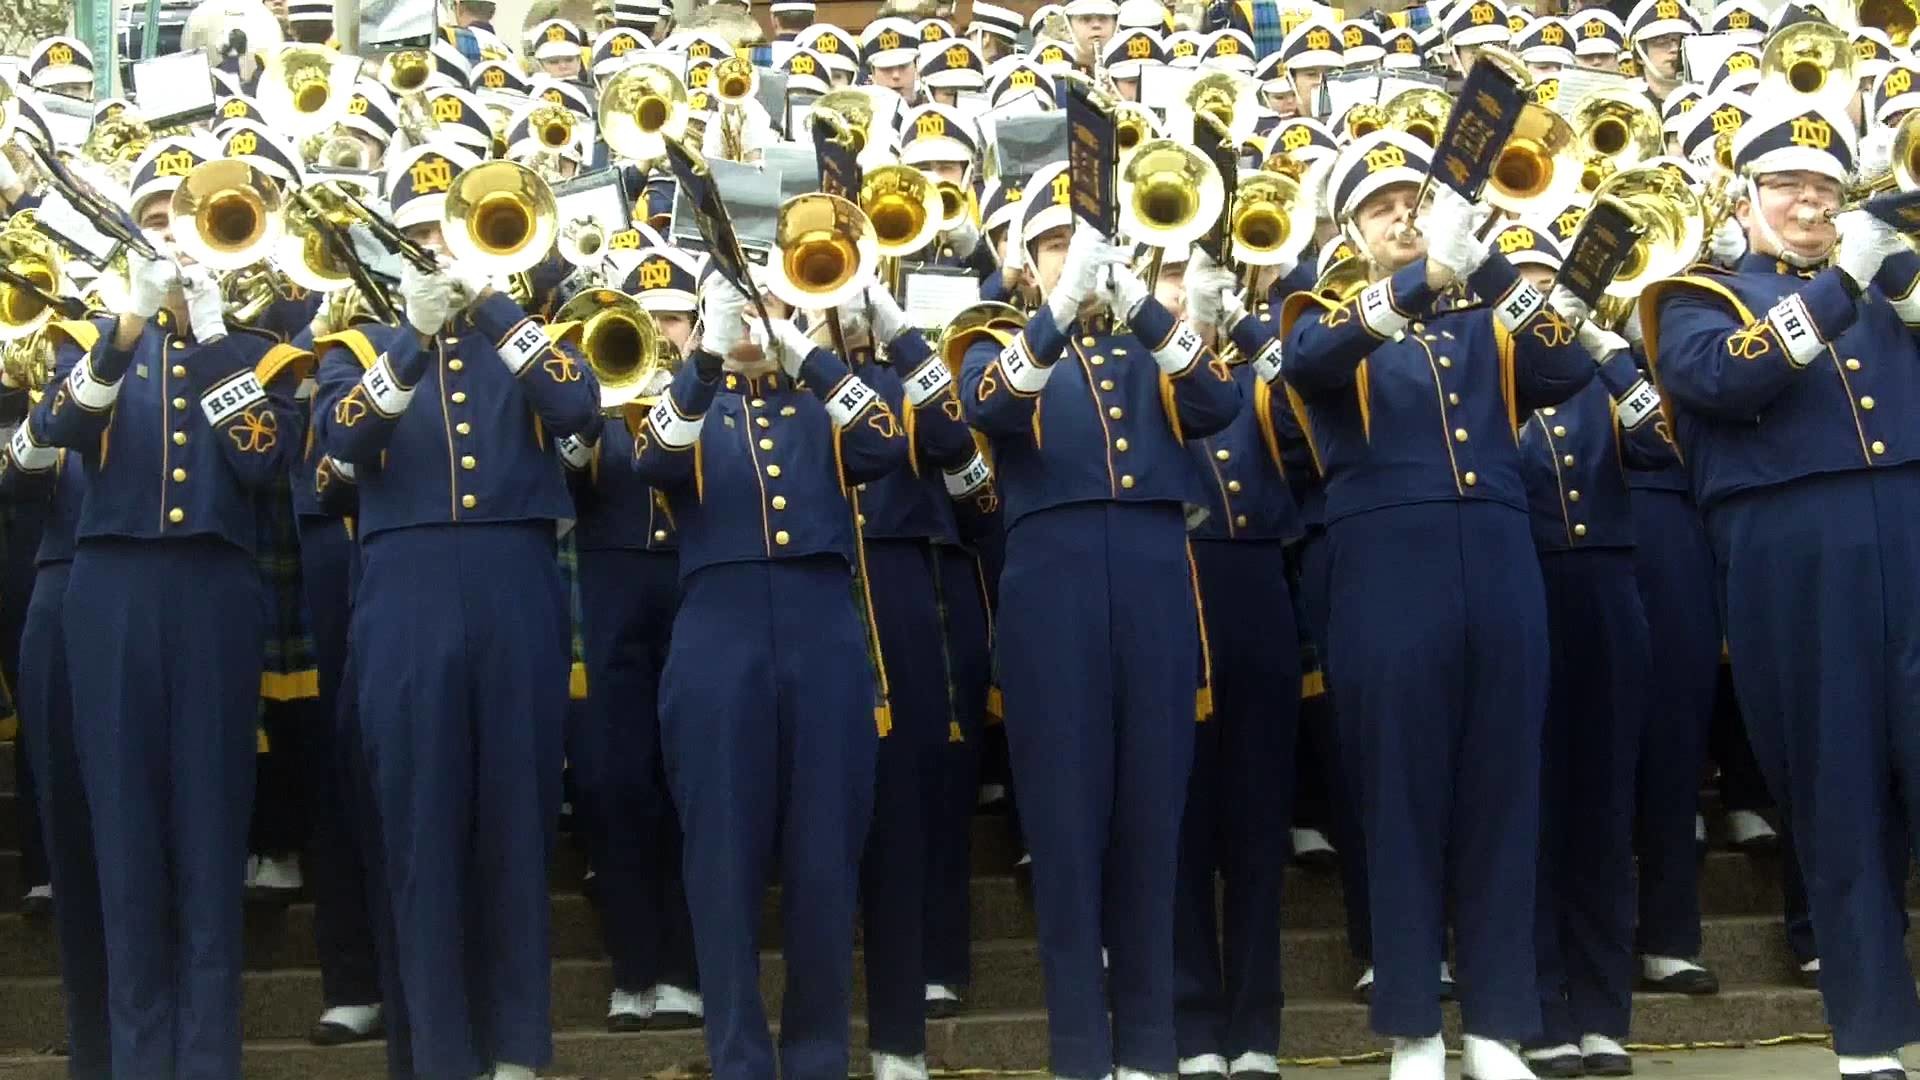 1920x1080 December 1963 - Four Seasons - Notre Dame Marching Band